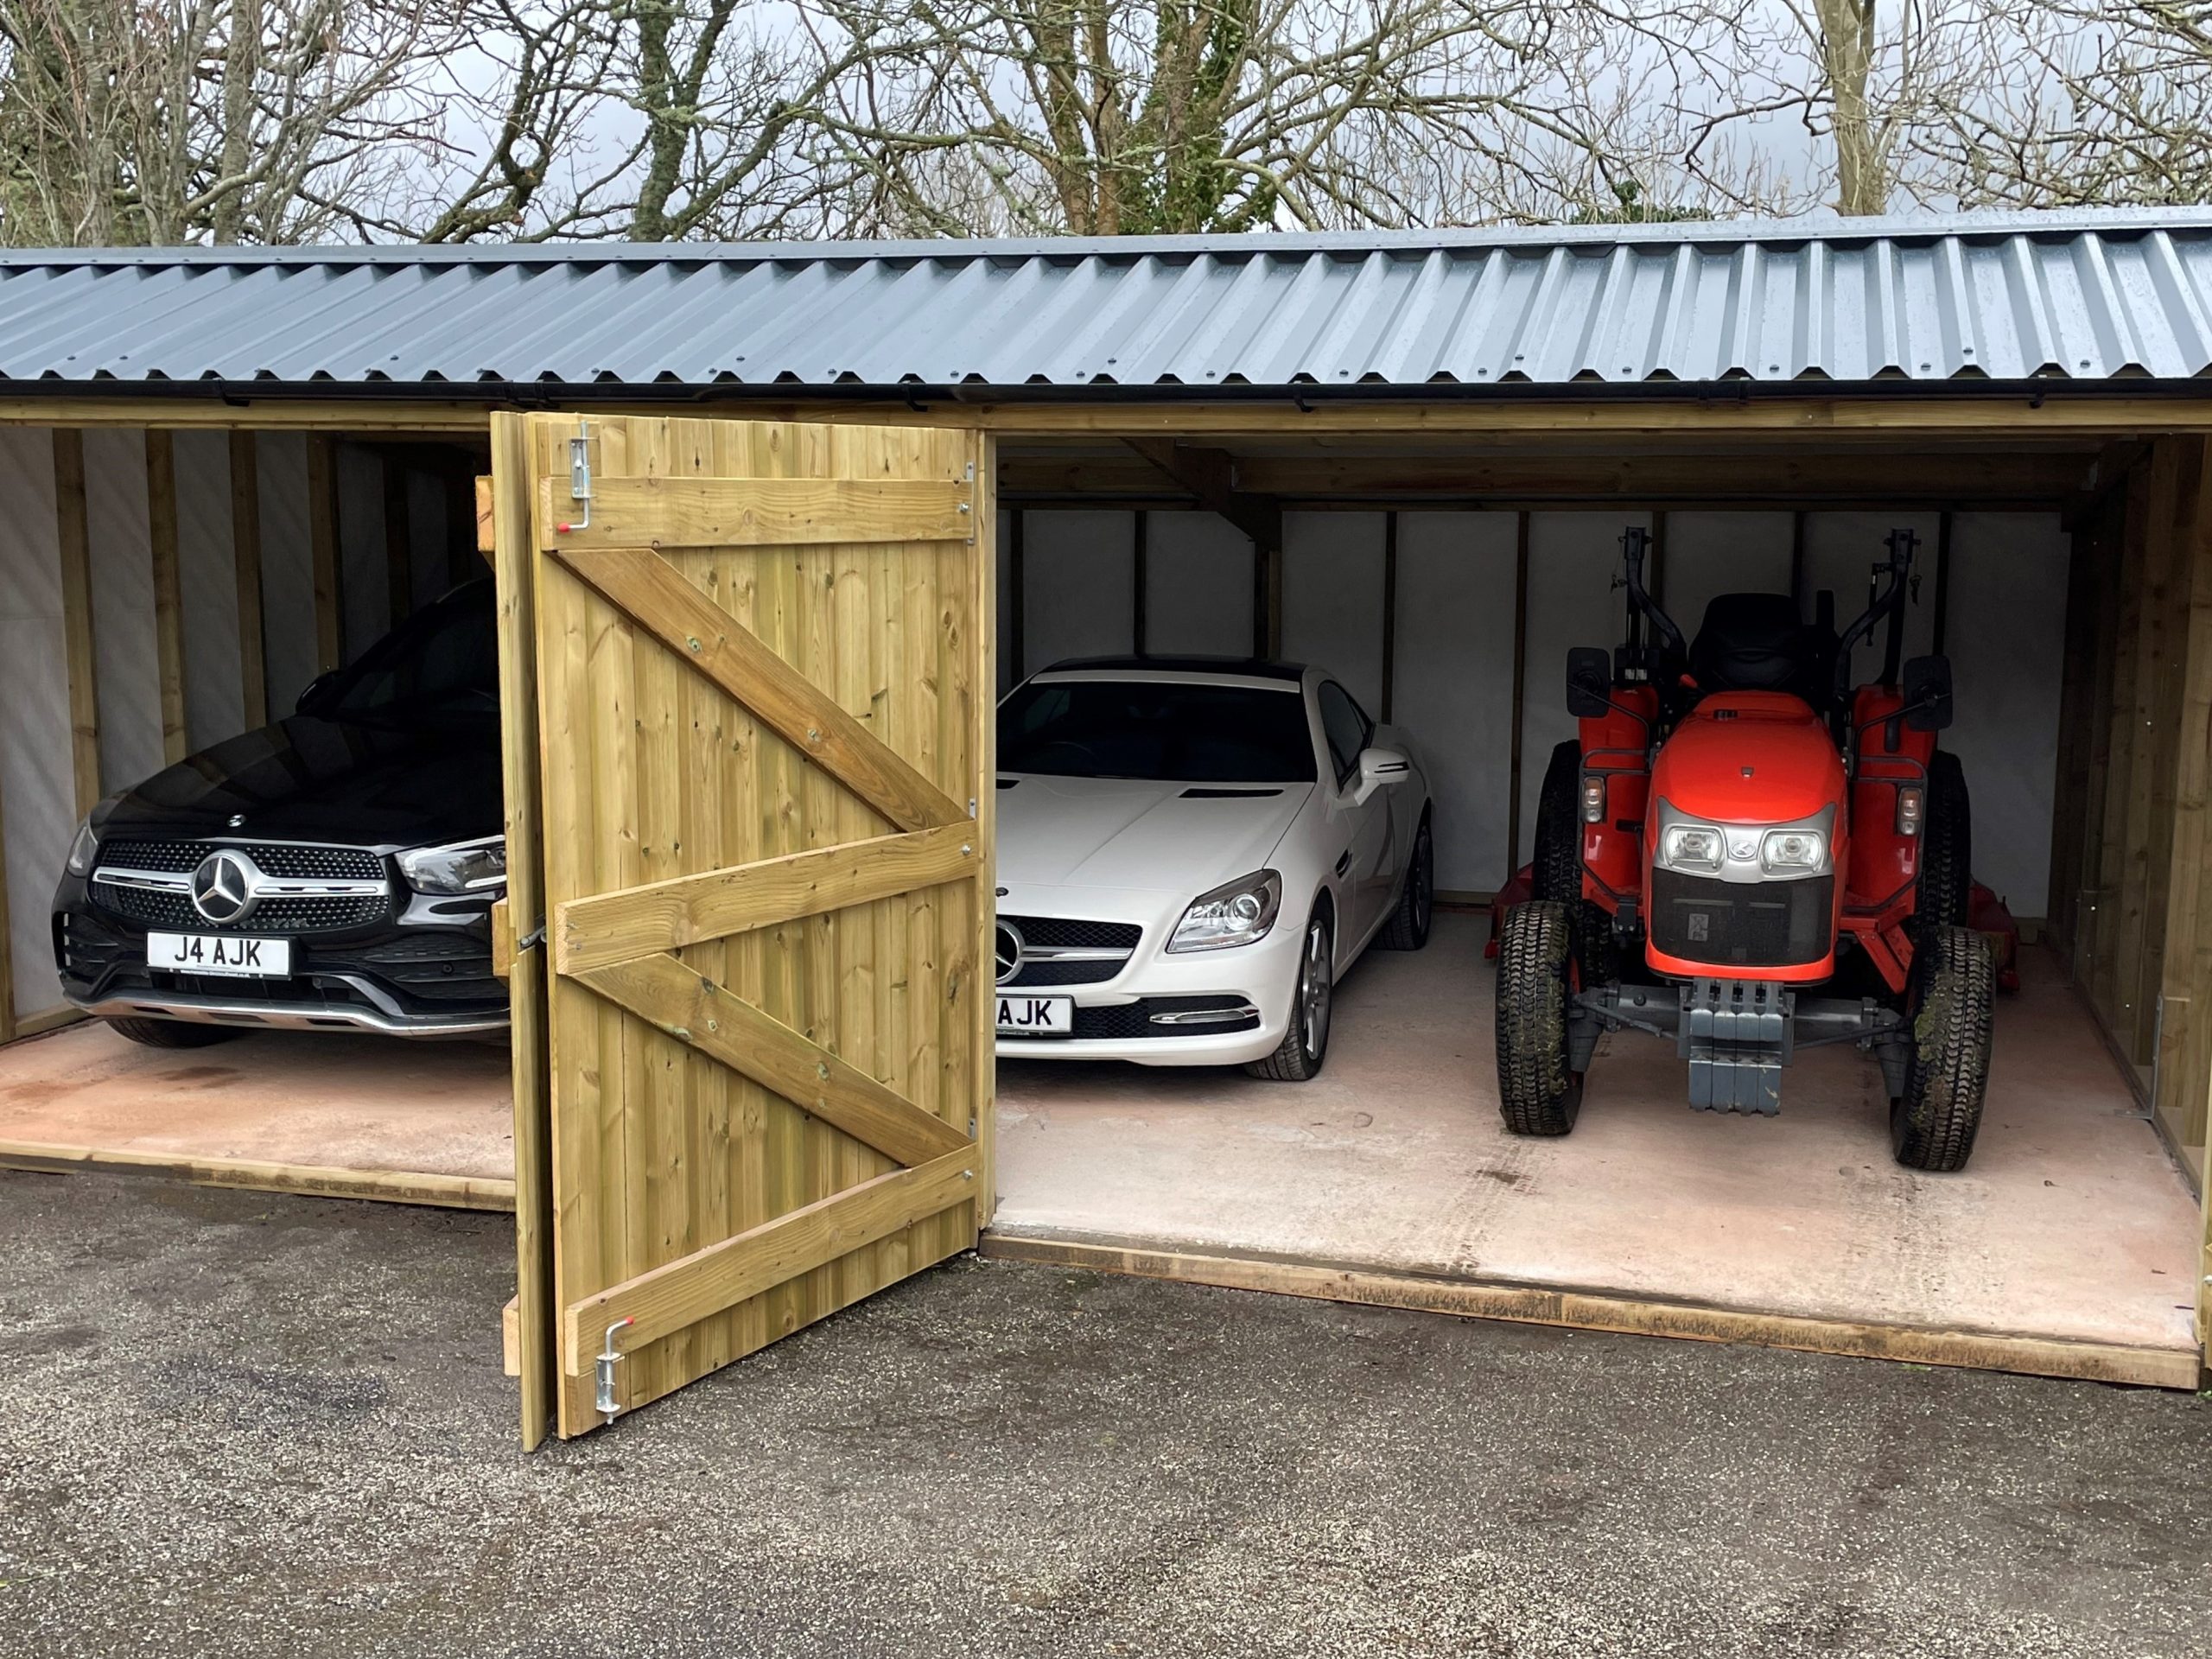 Garage housing cars ad tractor